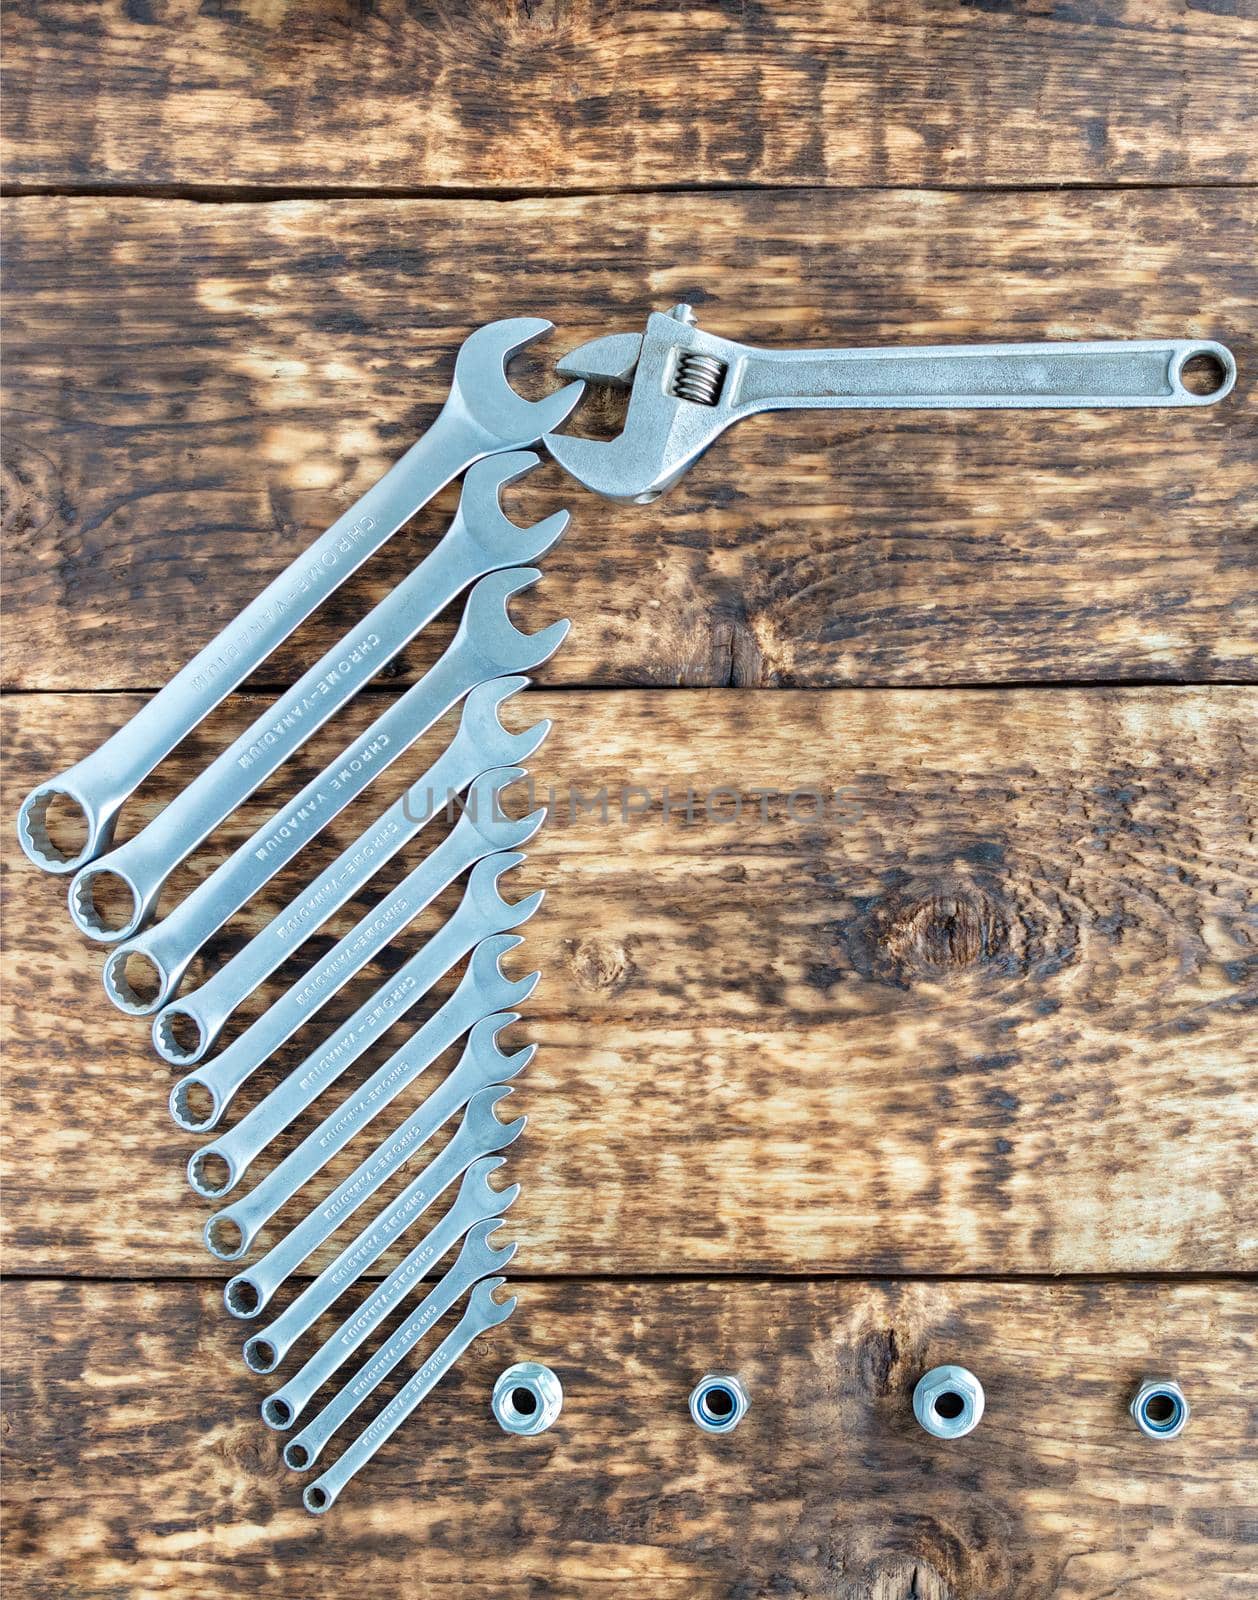 A set of chrome vanadium combination wrenches and an adjustable wrench on an old wooden background. by Sergii